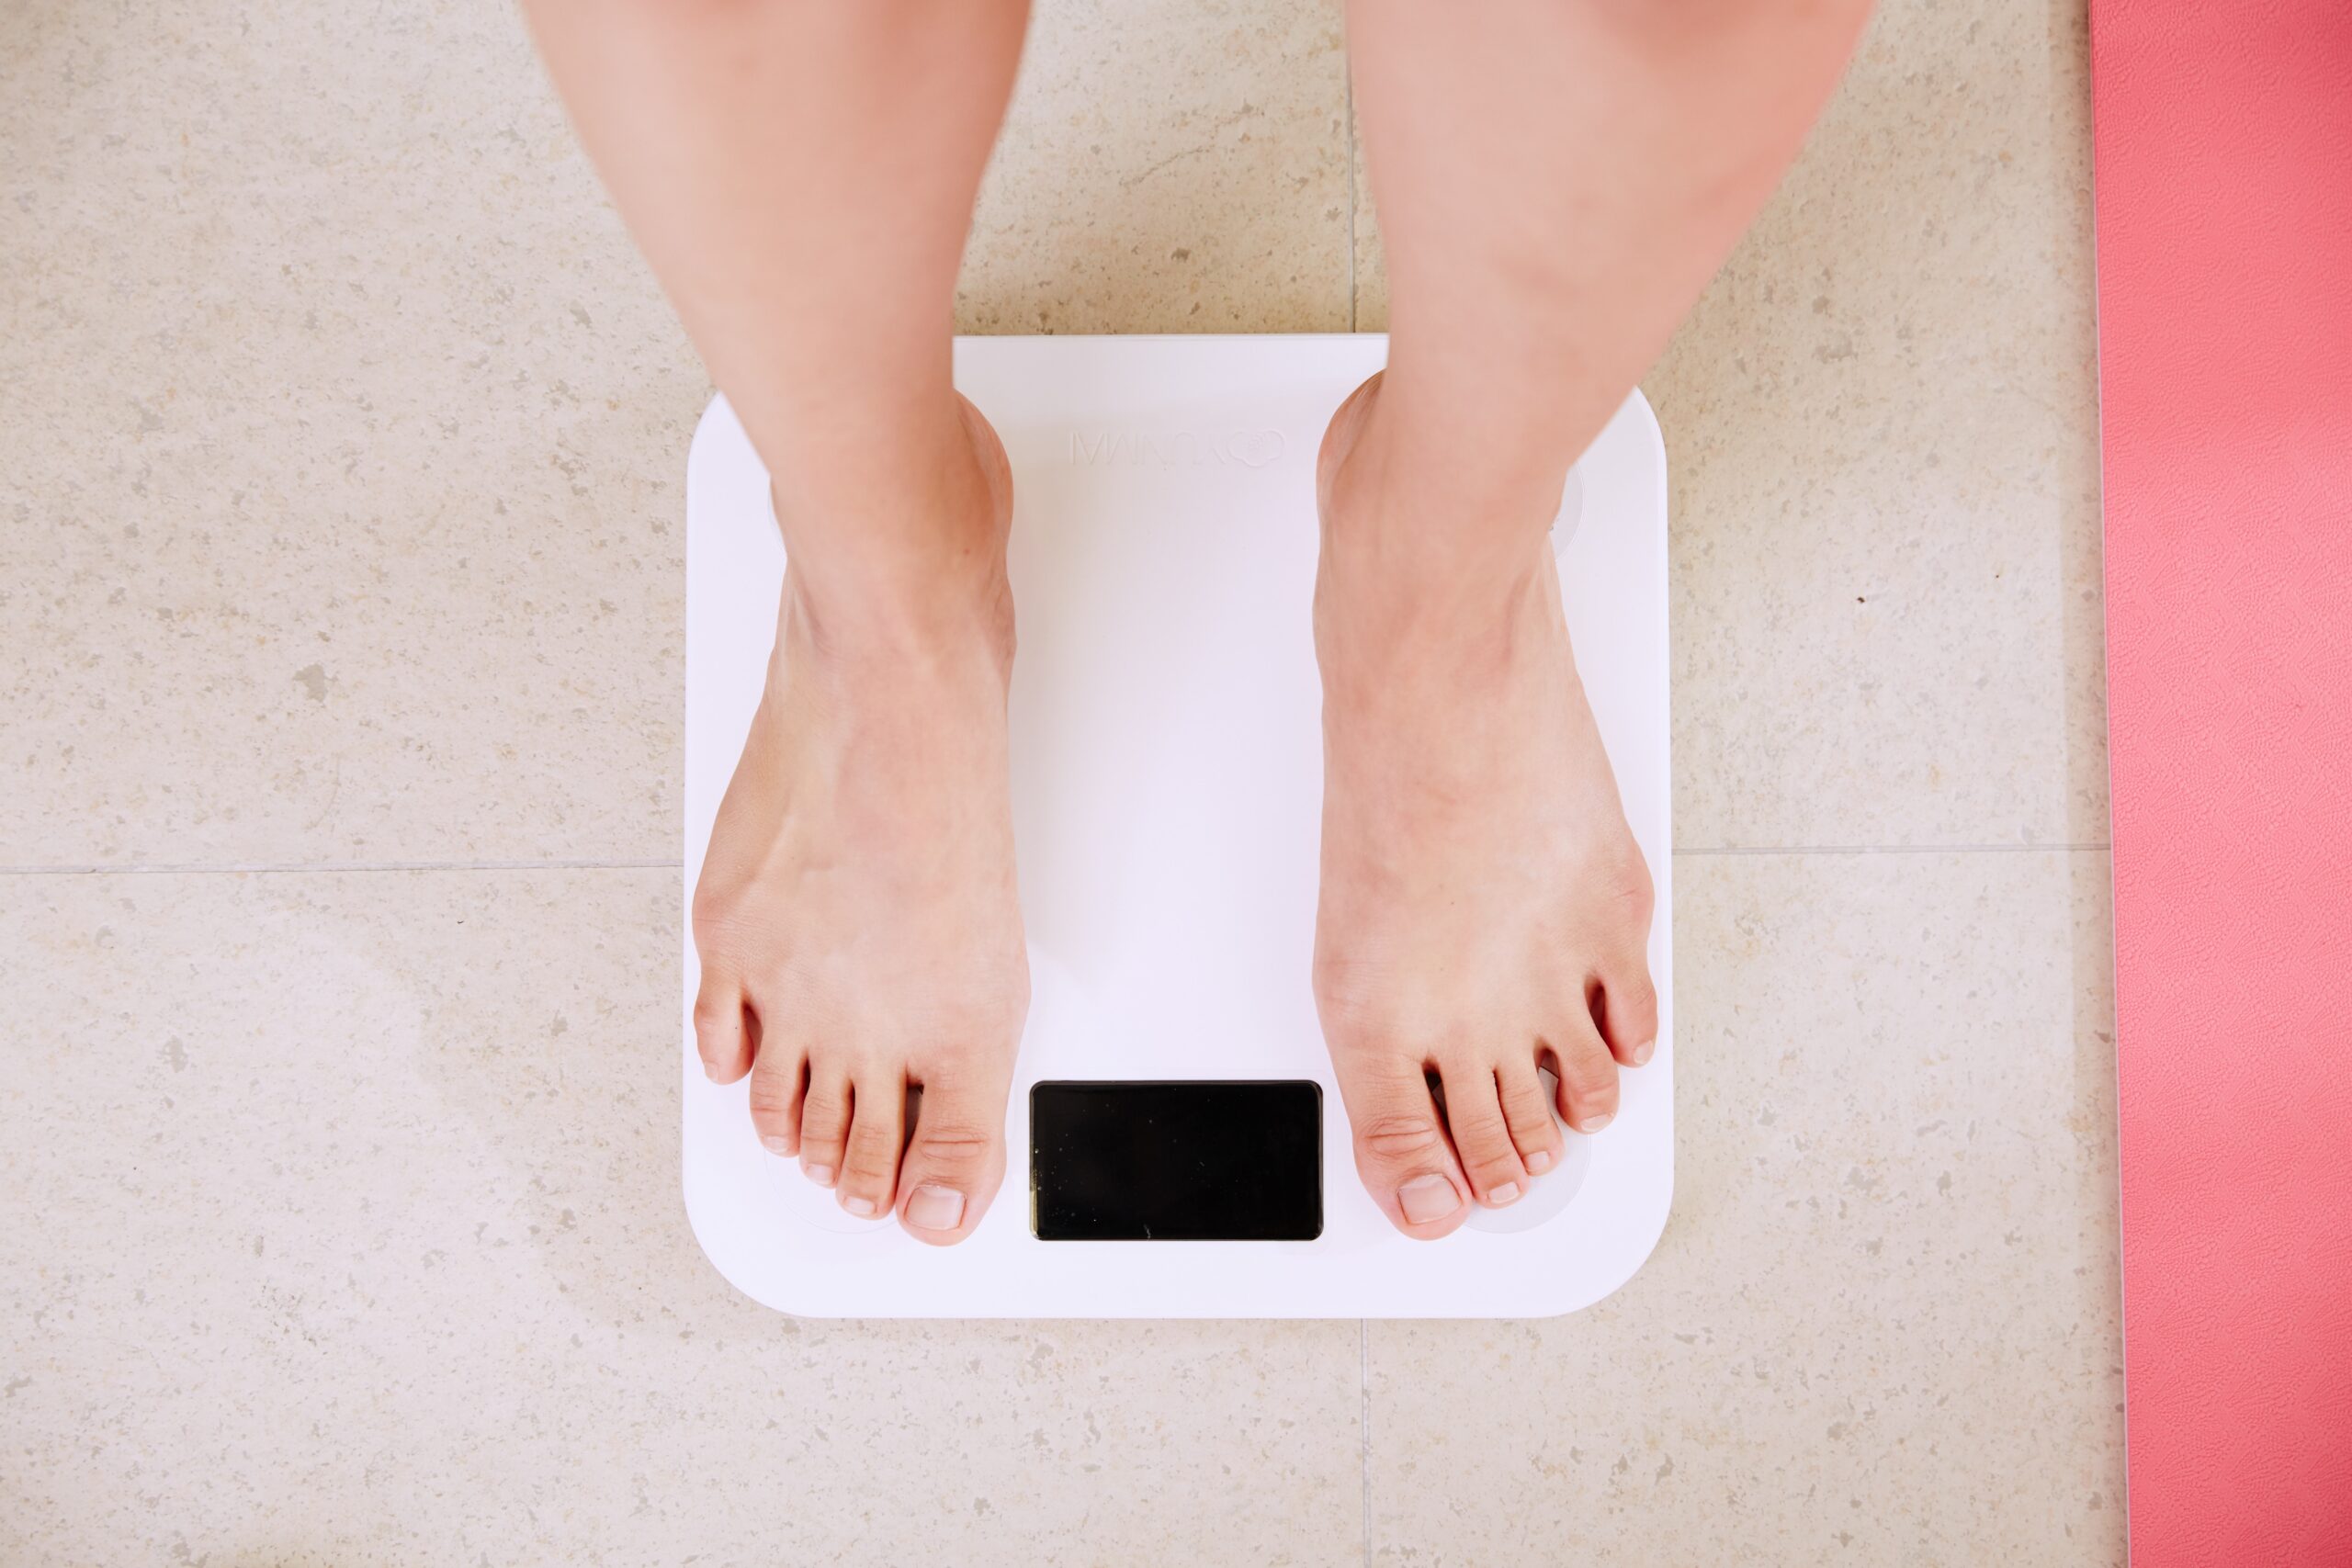 Person standing on digital bathroom scales